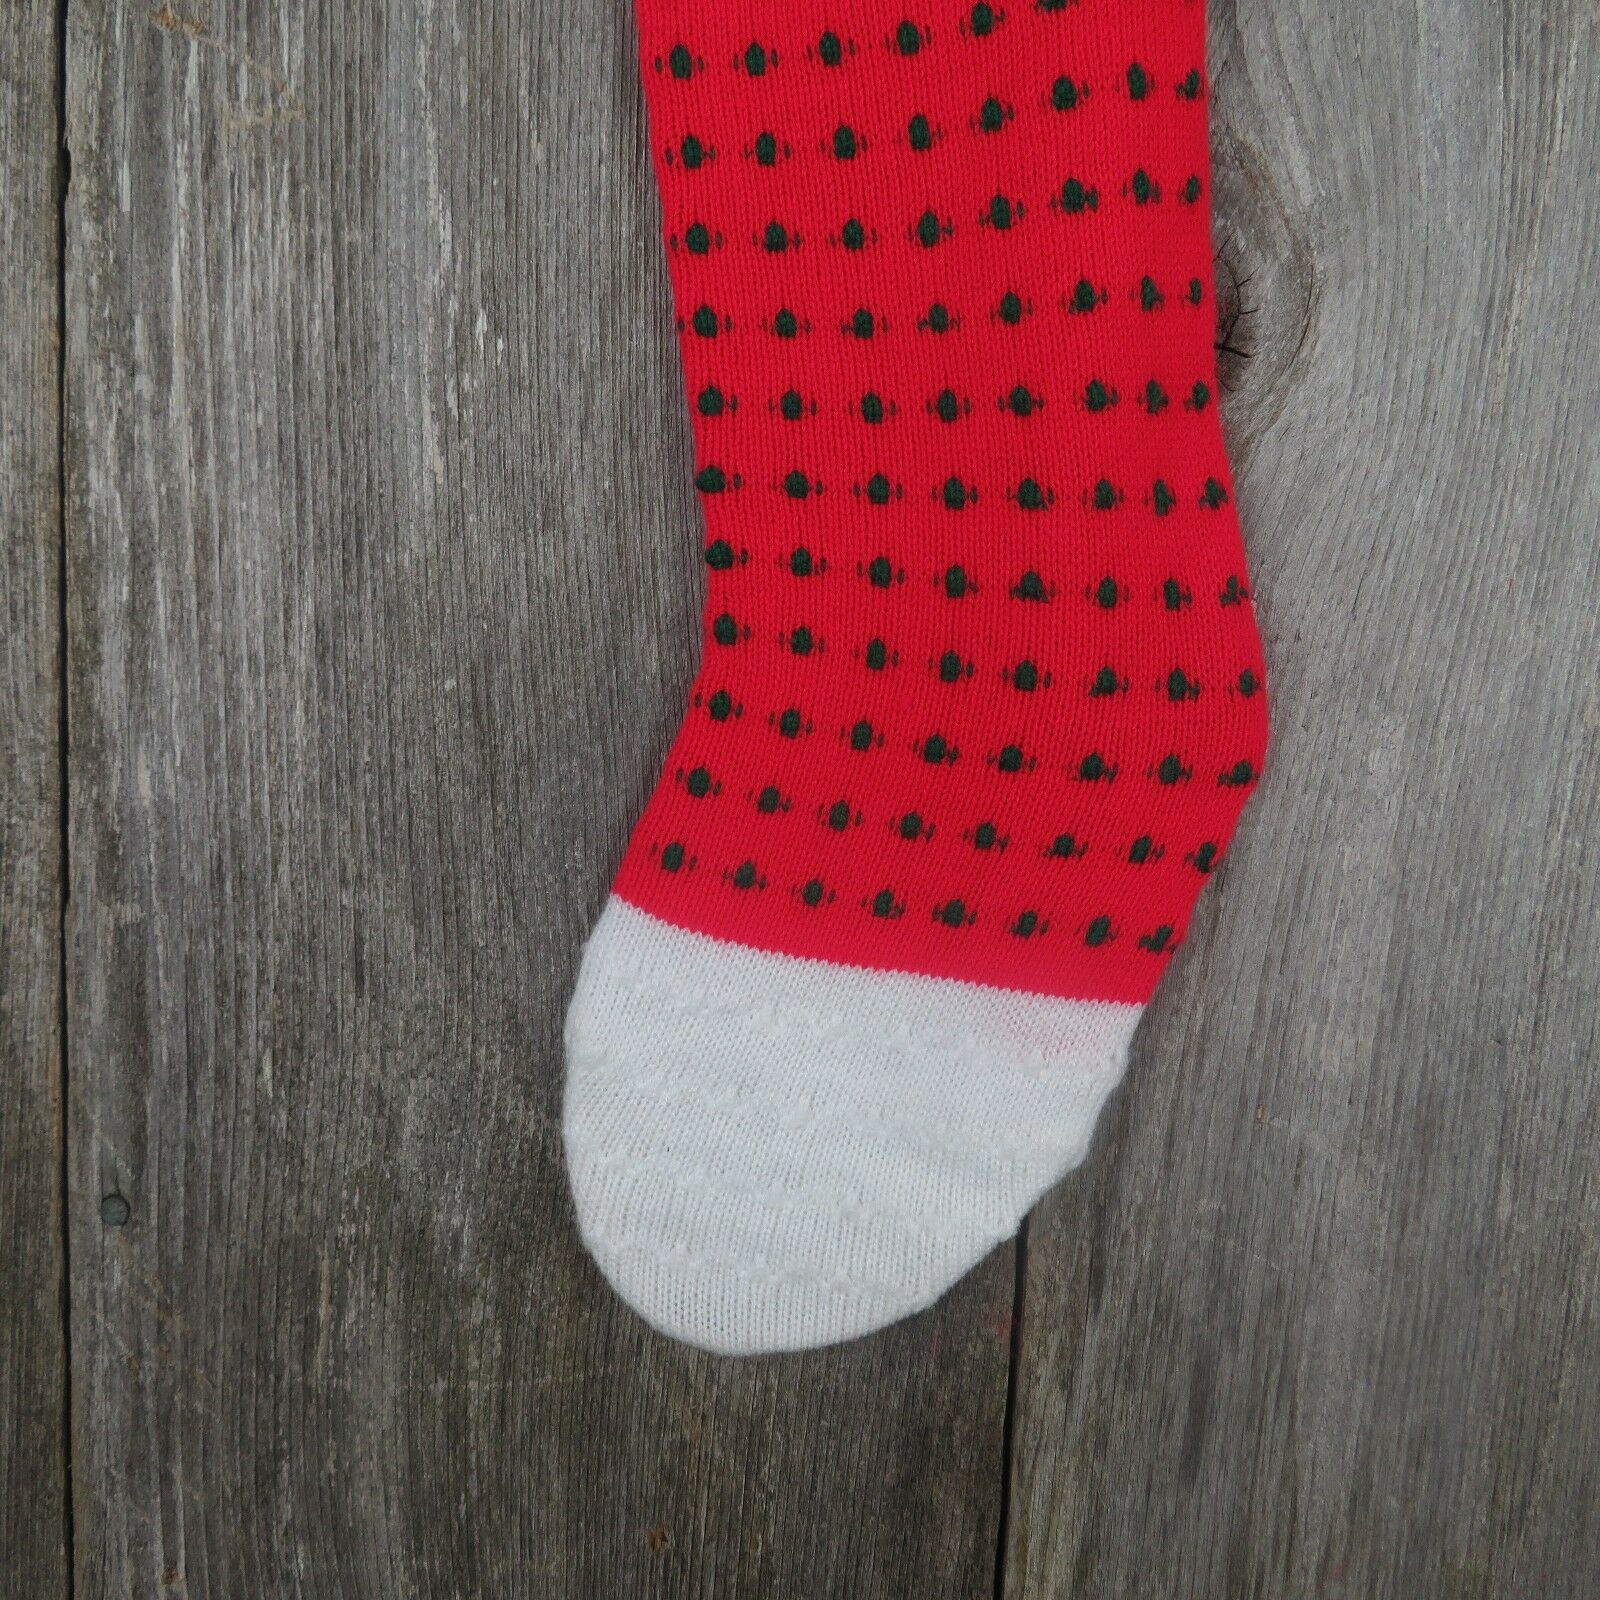 Christmas Stocking Knitted Knit Tis the Season Vintage 1980s Red Green White st6 - At Grandma's Table